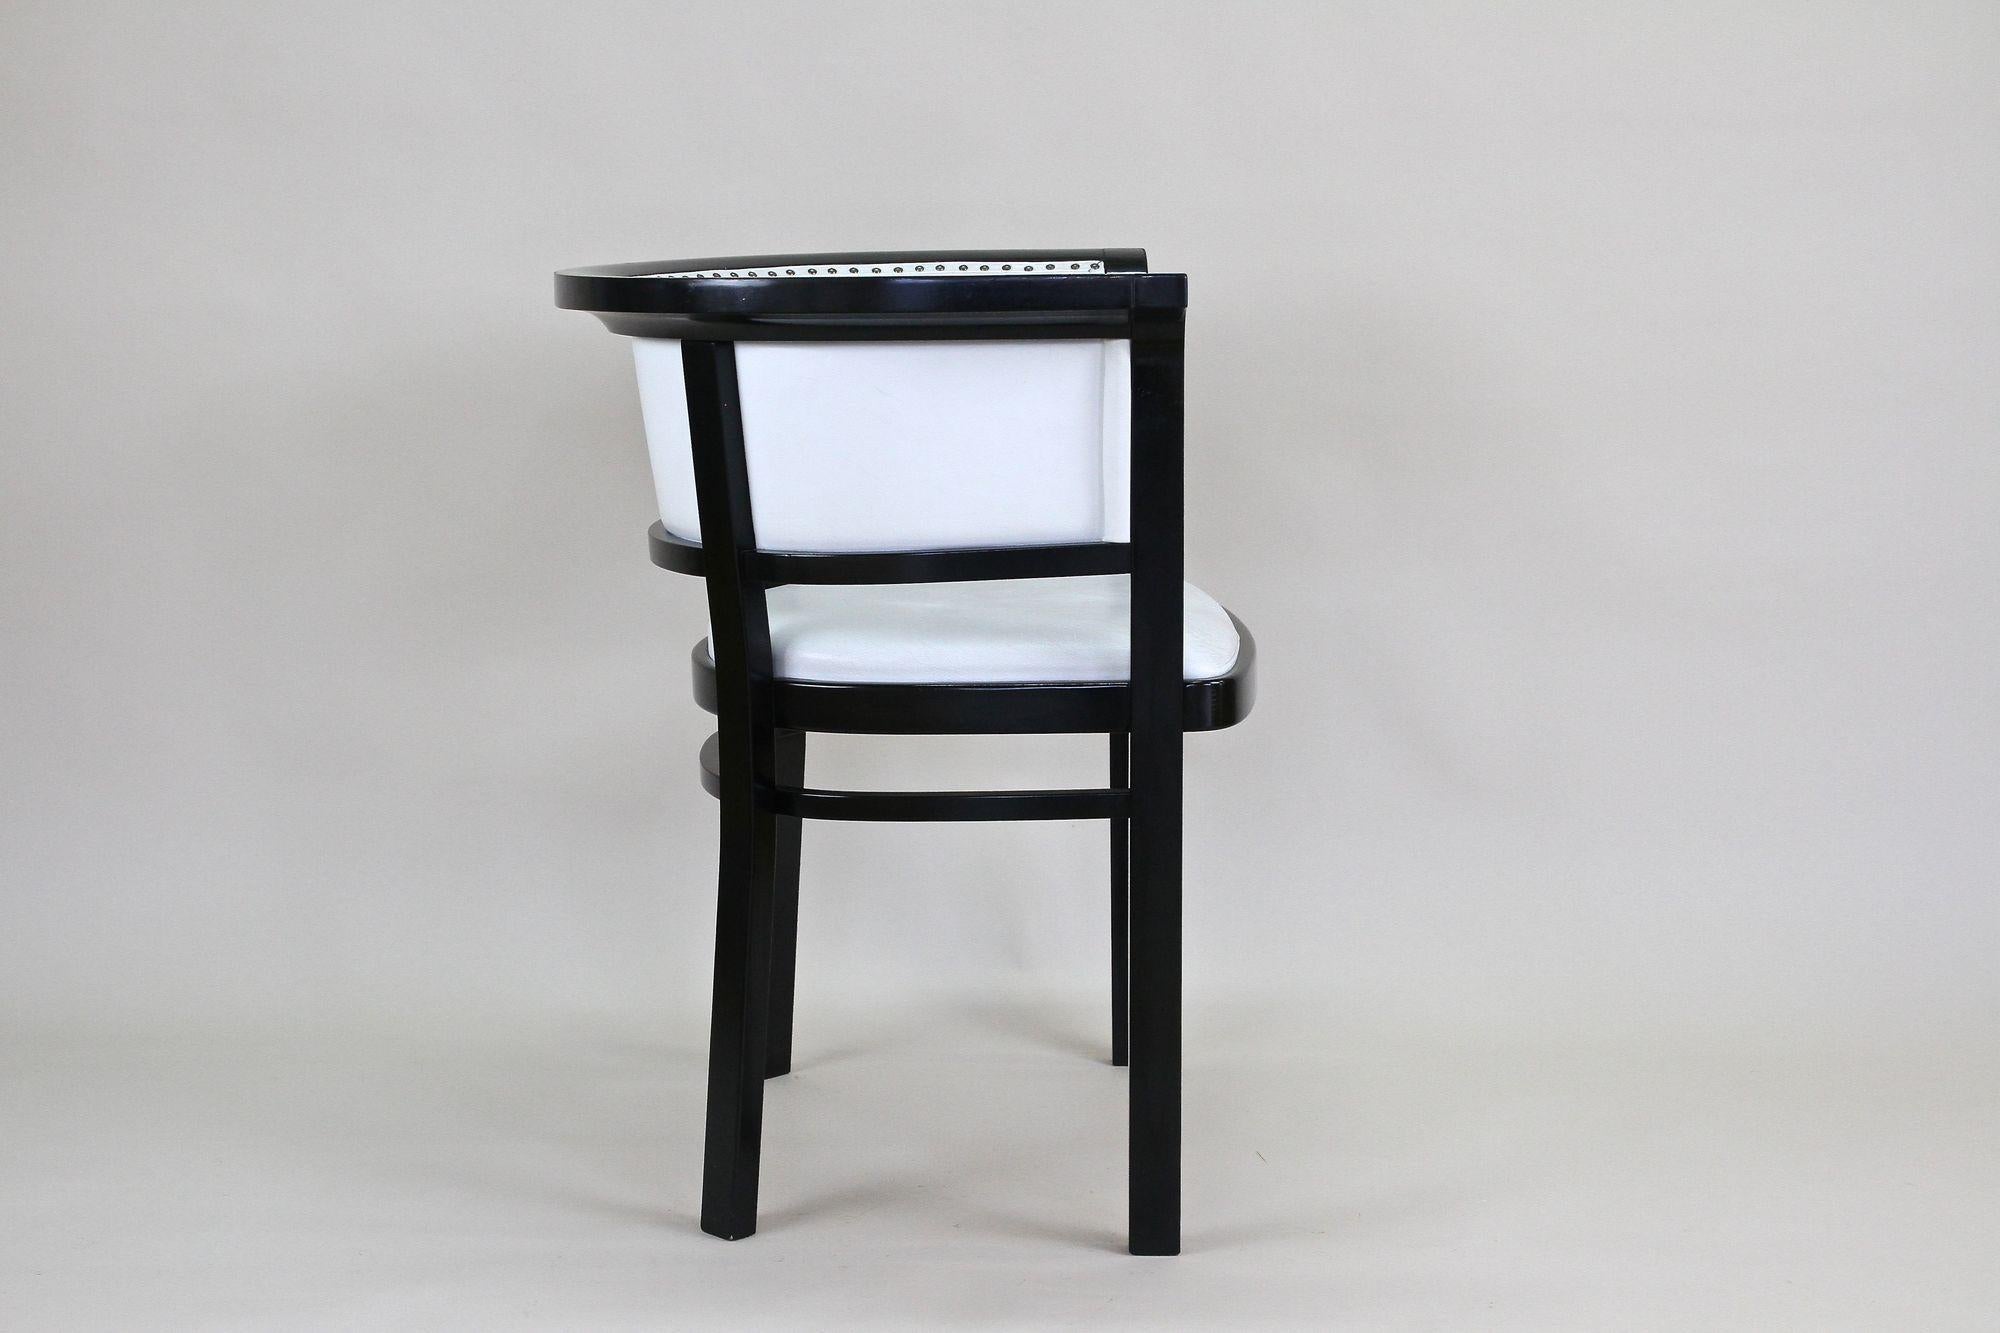 Black Thonet Armchair with White Leather, Design Marcel Kammerer, at circa 1980 For Sale 6